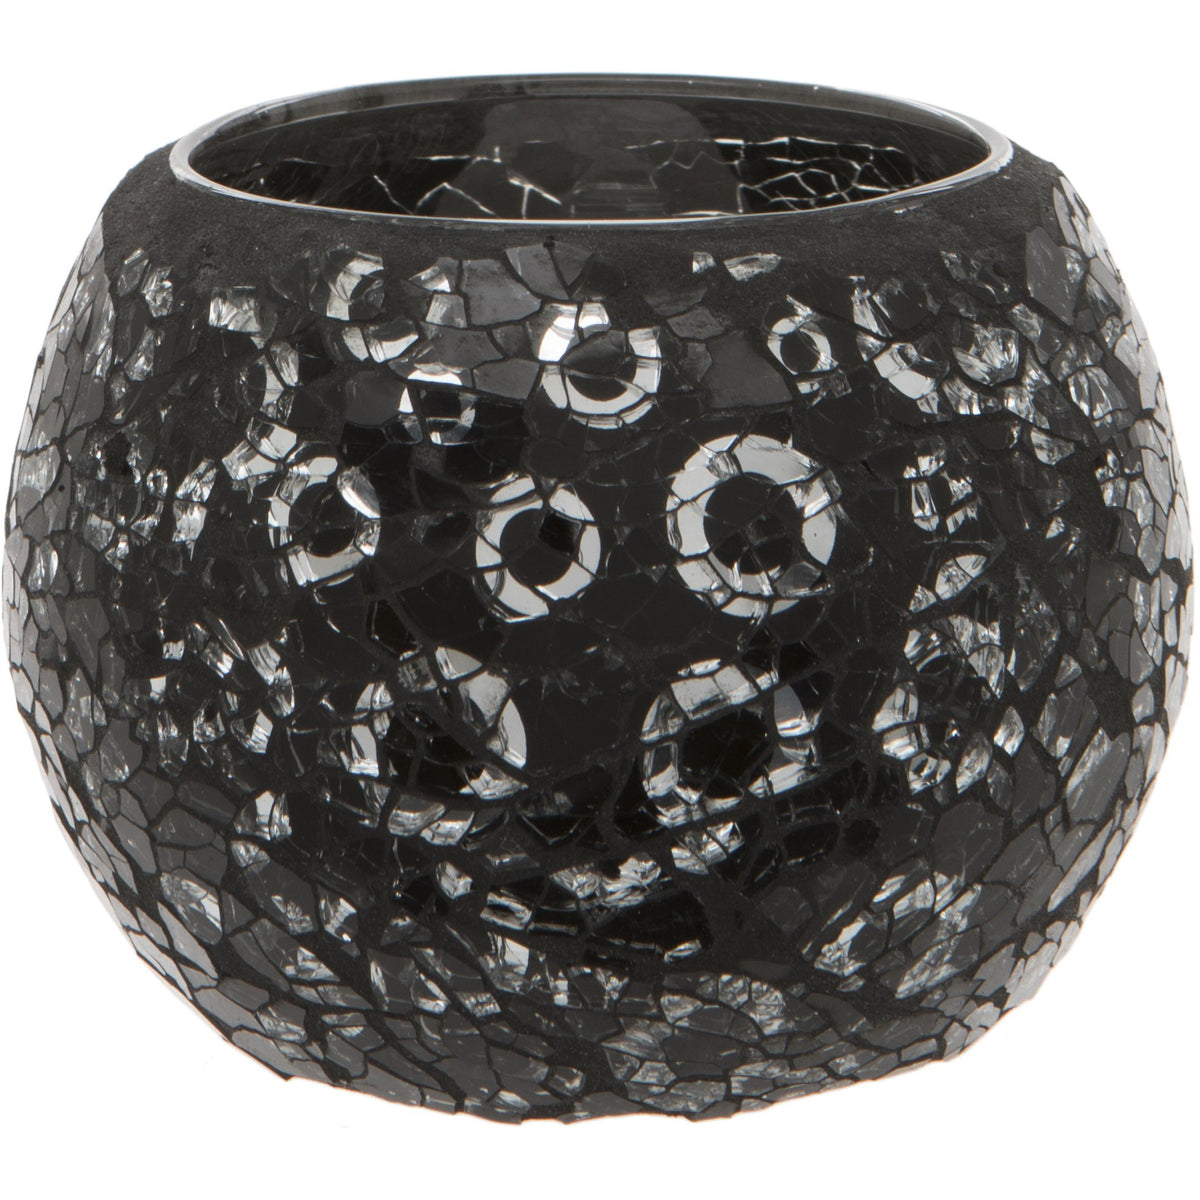 Black and Silver Crackled Glass Mosaic Tealight Holder